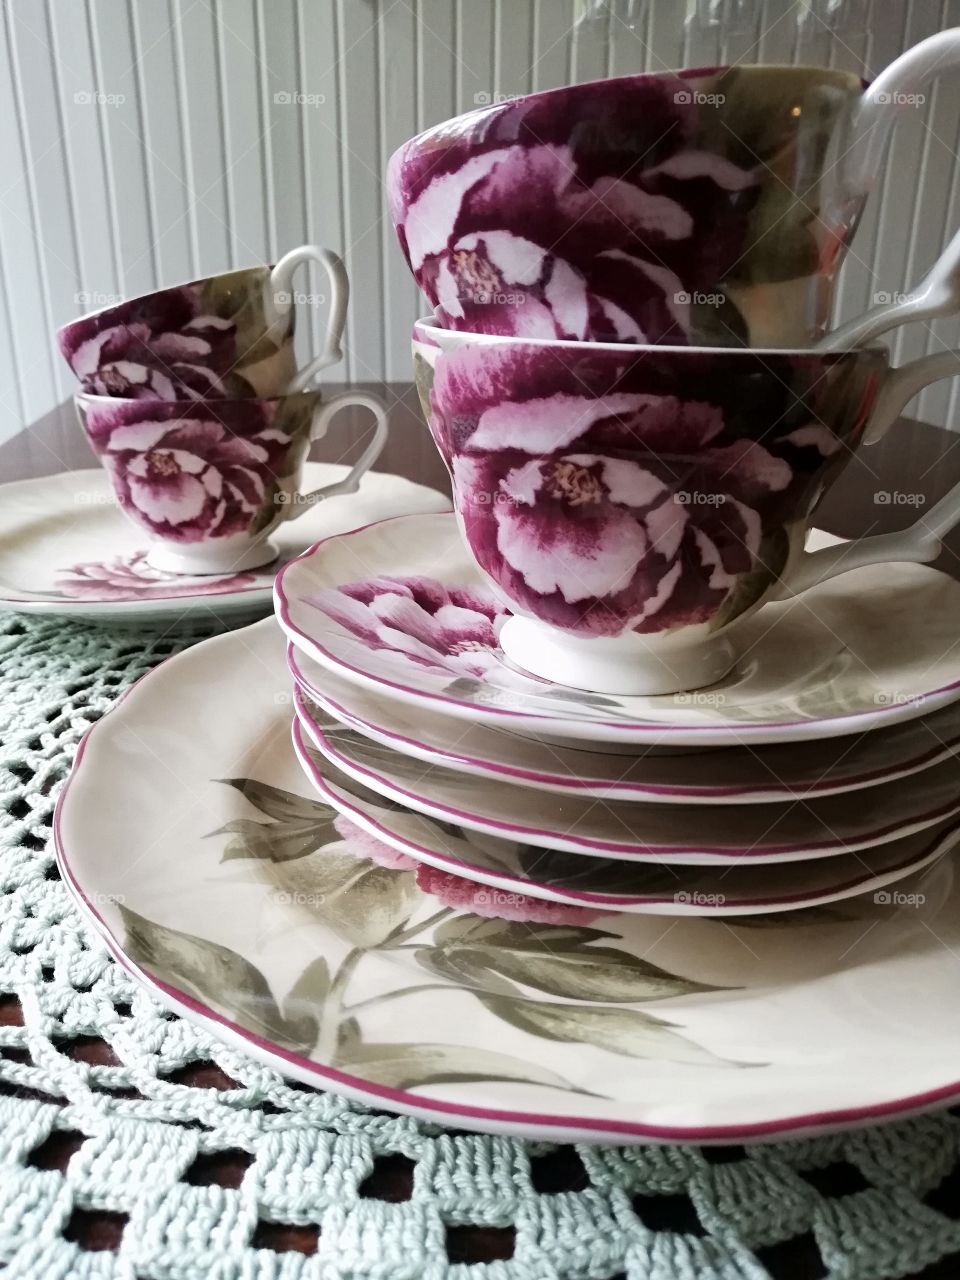 Patterned coffee cups on the green lacy table cloth on a brown table. Flowers are on the surfaces and a stripe on the edges of the plates of two different sizes, behind glasses on the wall.